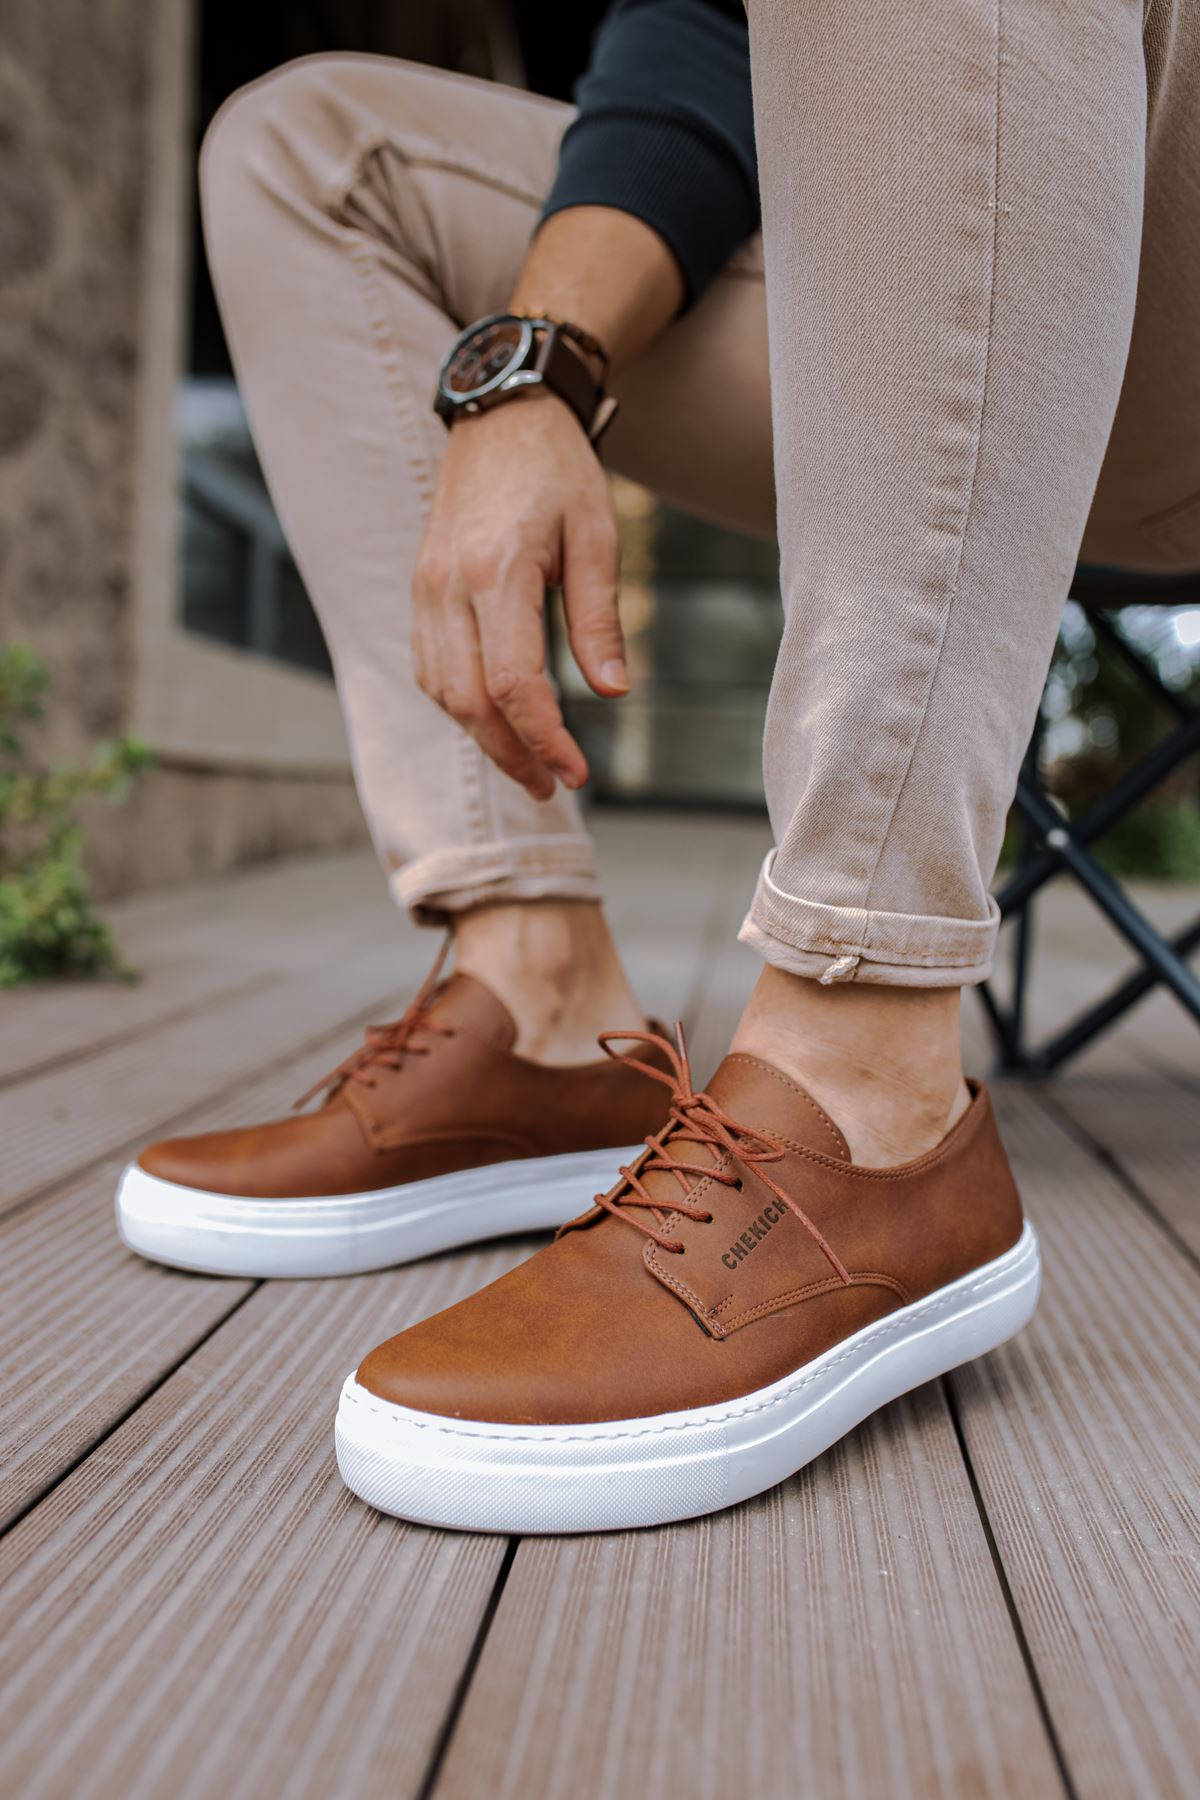 Chekich Men's Shoes Tan Color Artificial Leather Lace-Up Summer 2021 Fashion Sneakers Casual Vulcanized Material Wedding Office Solid Brown Footwear Lightweight Air Comfort Breathable CH005 V5